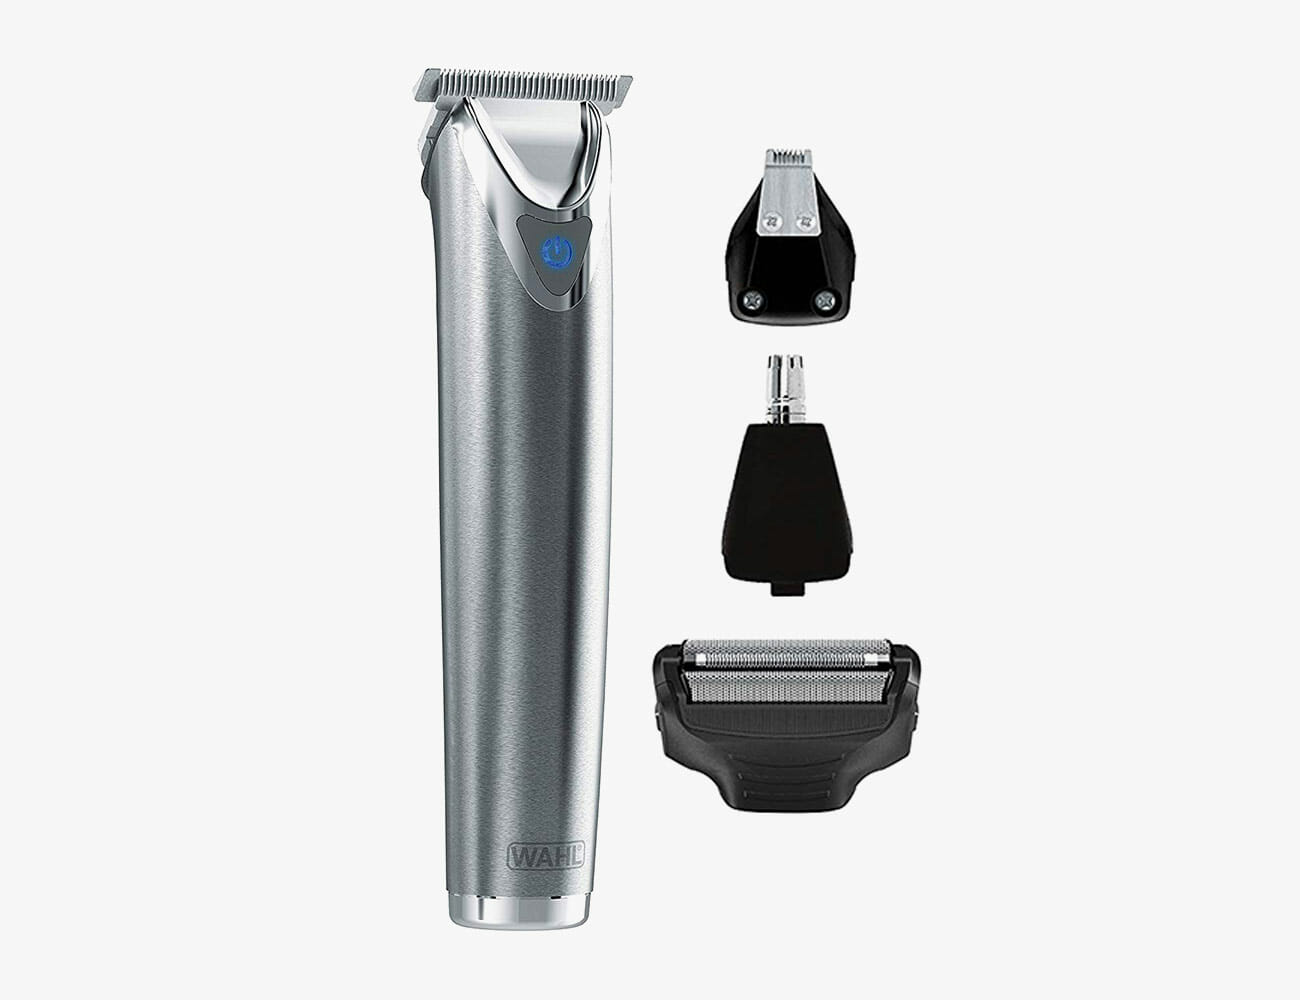 best all in one trimmer 2019